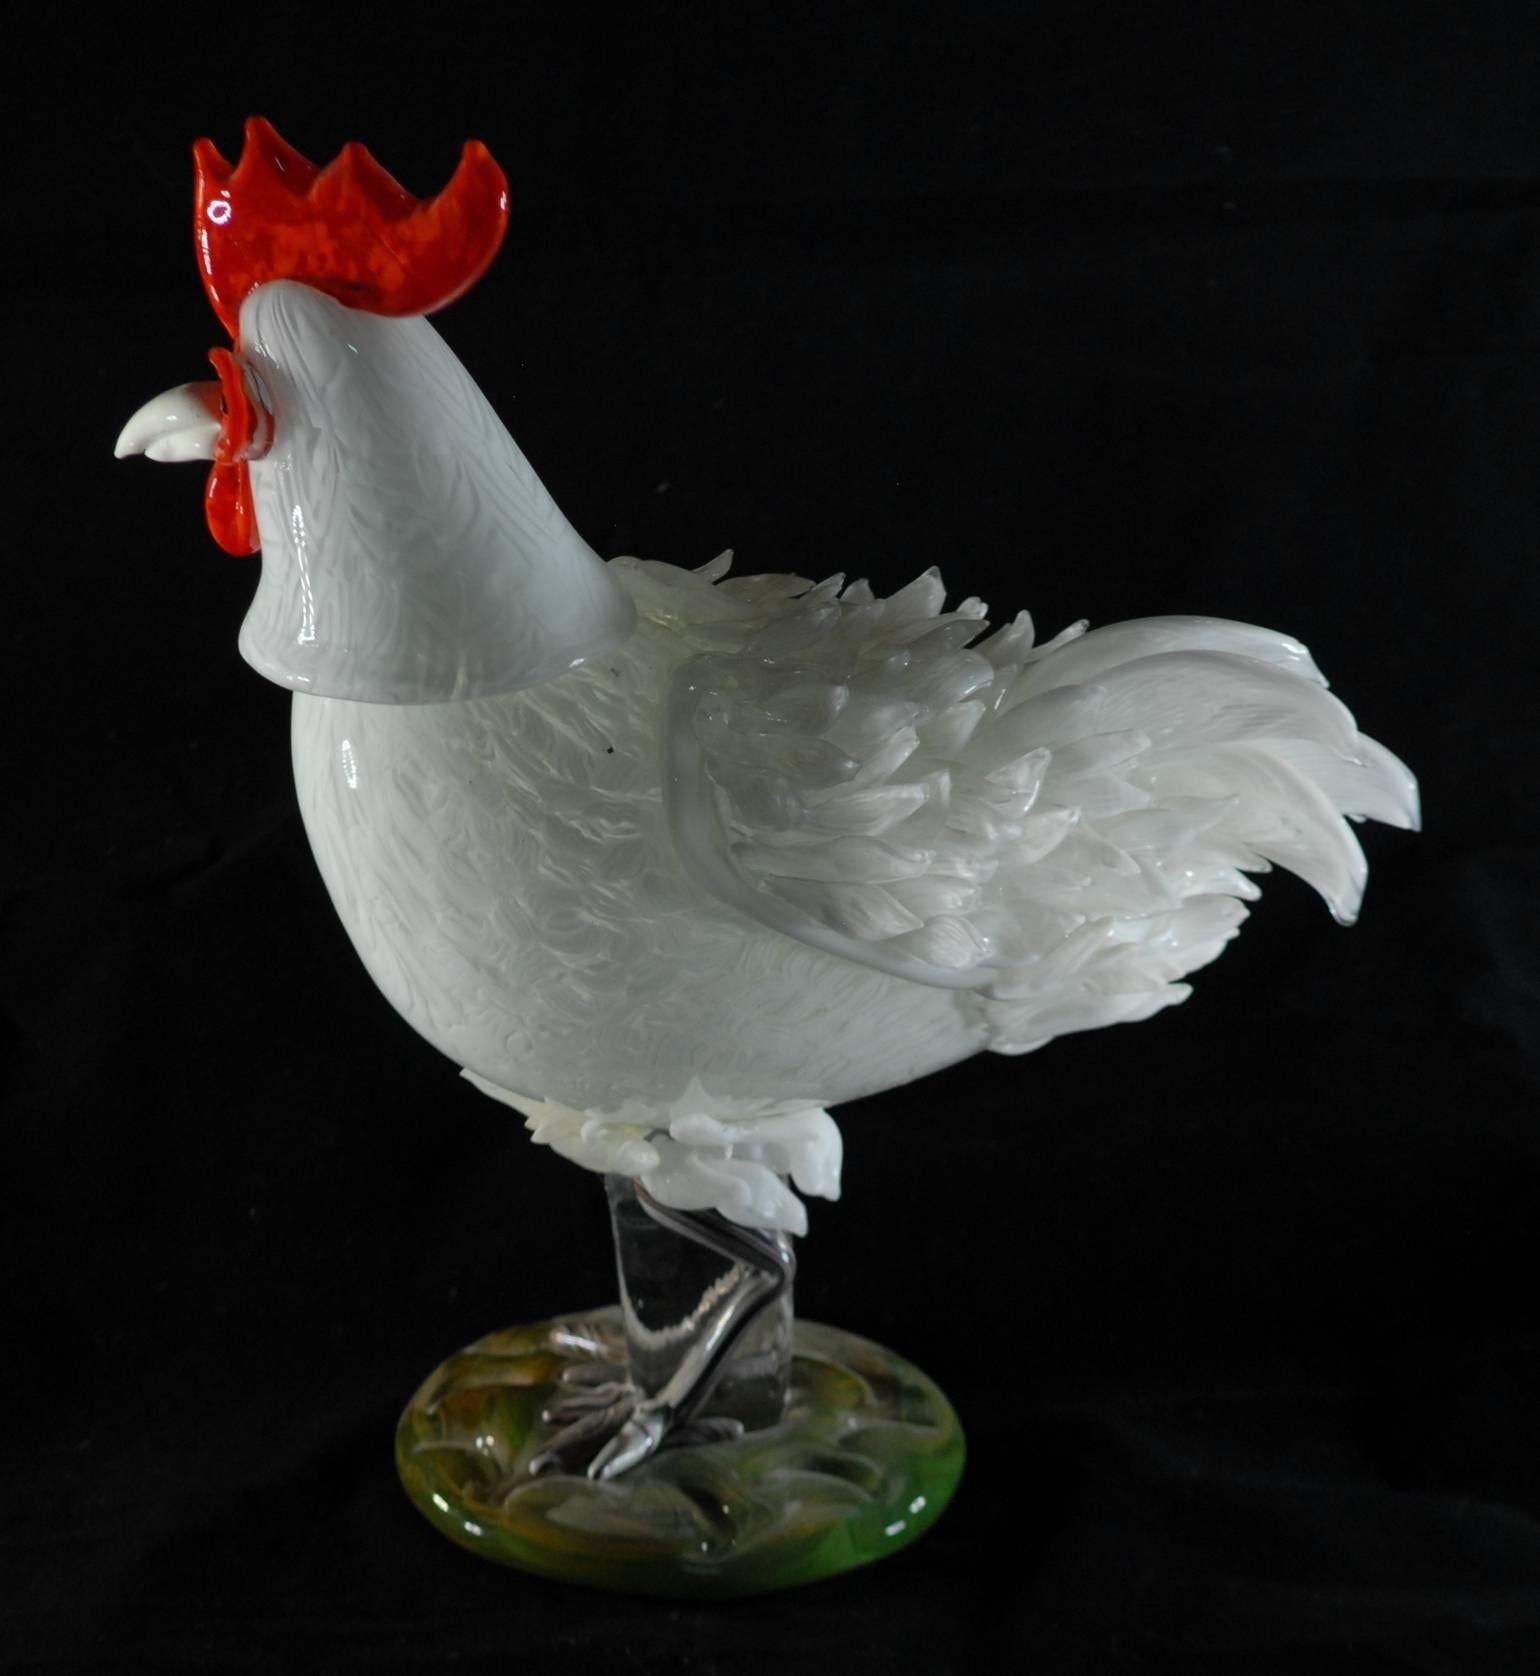 Hand-Crafted Luciano Ferro for Avem, 1958-62, Two Large White Roosters